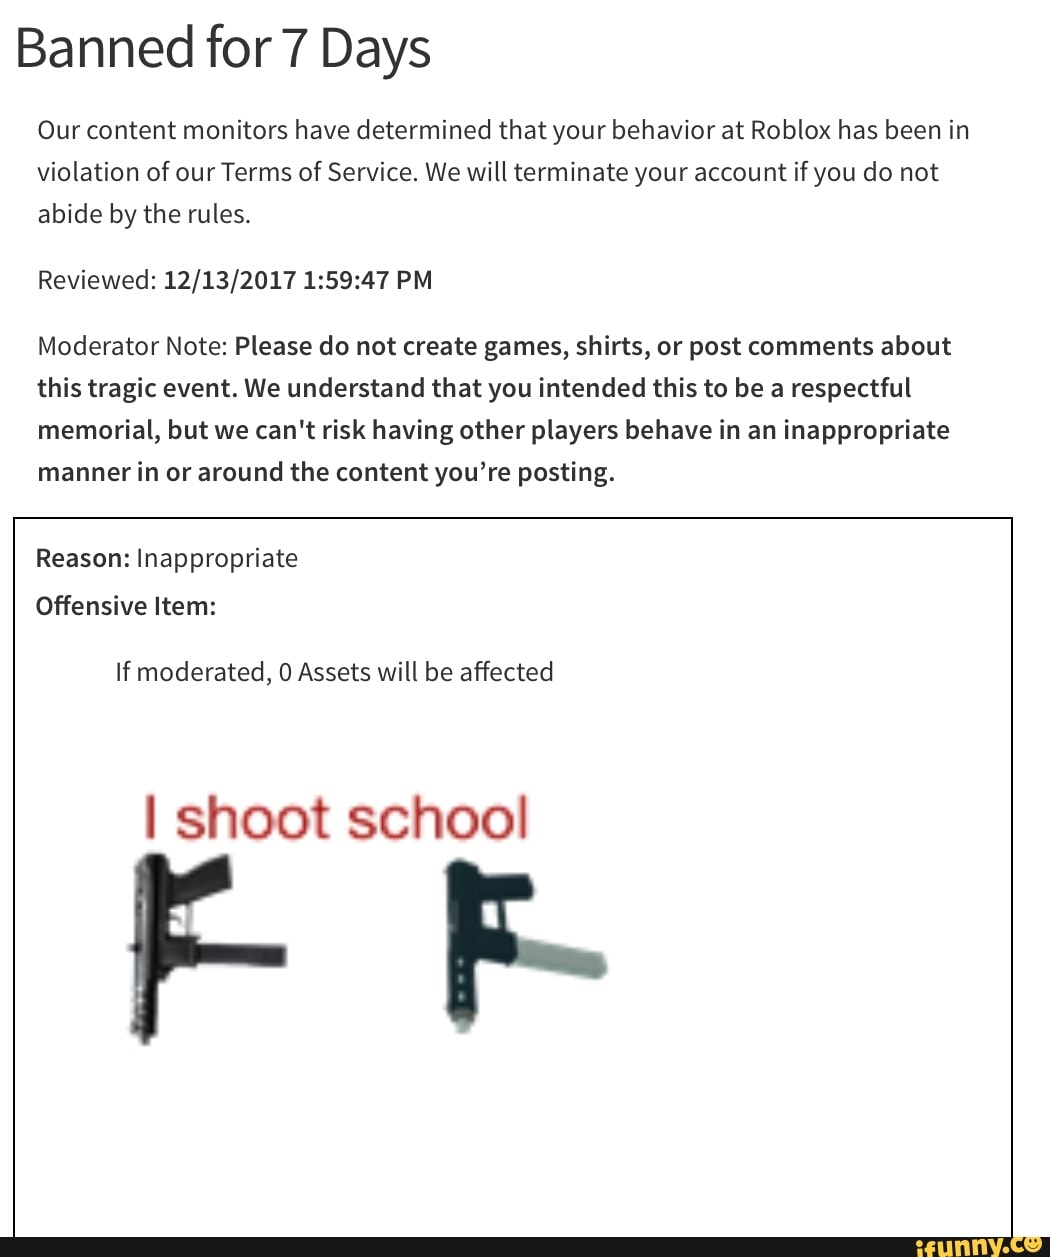 Bannedforydays Our Content Monitors Have Determined That Your Behavior At Roblox Has Been In Violation Of Ourterms Of Service We Will Terminate Your Account If You Do Not Abide By The Rules - terminated accounts memorial roblox